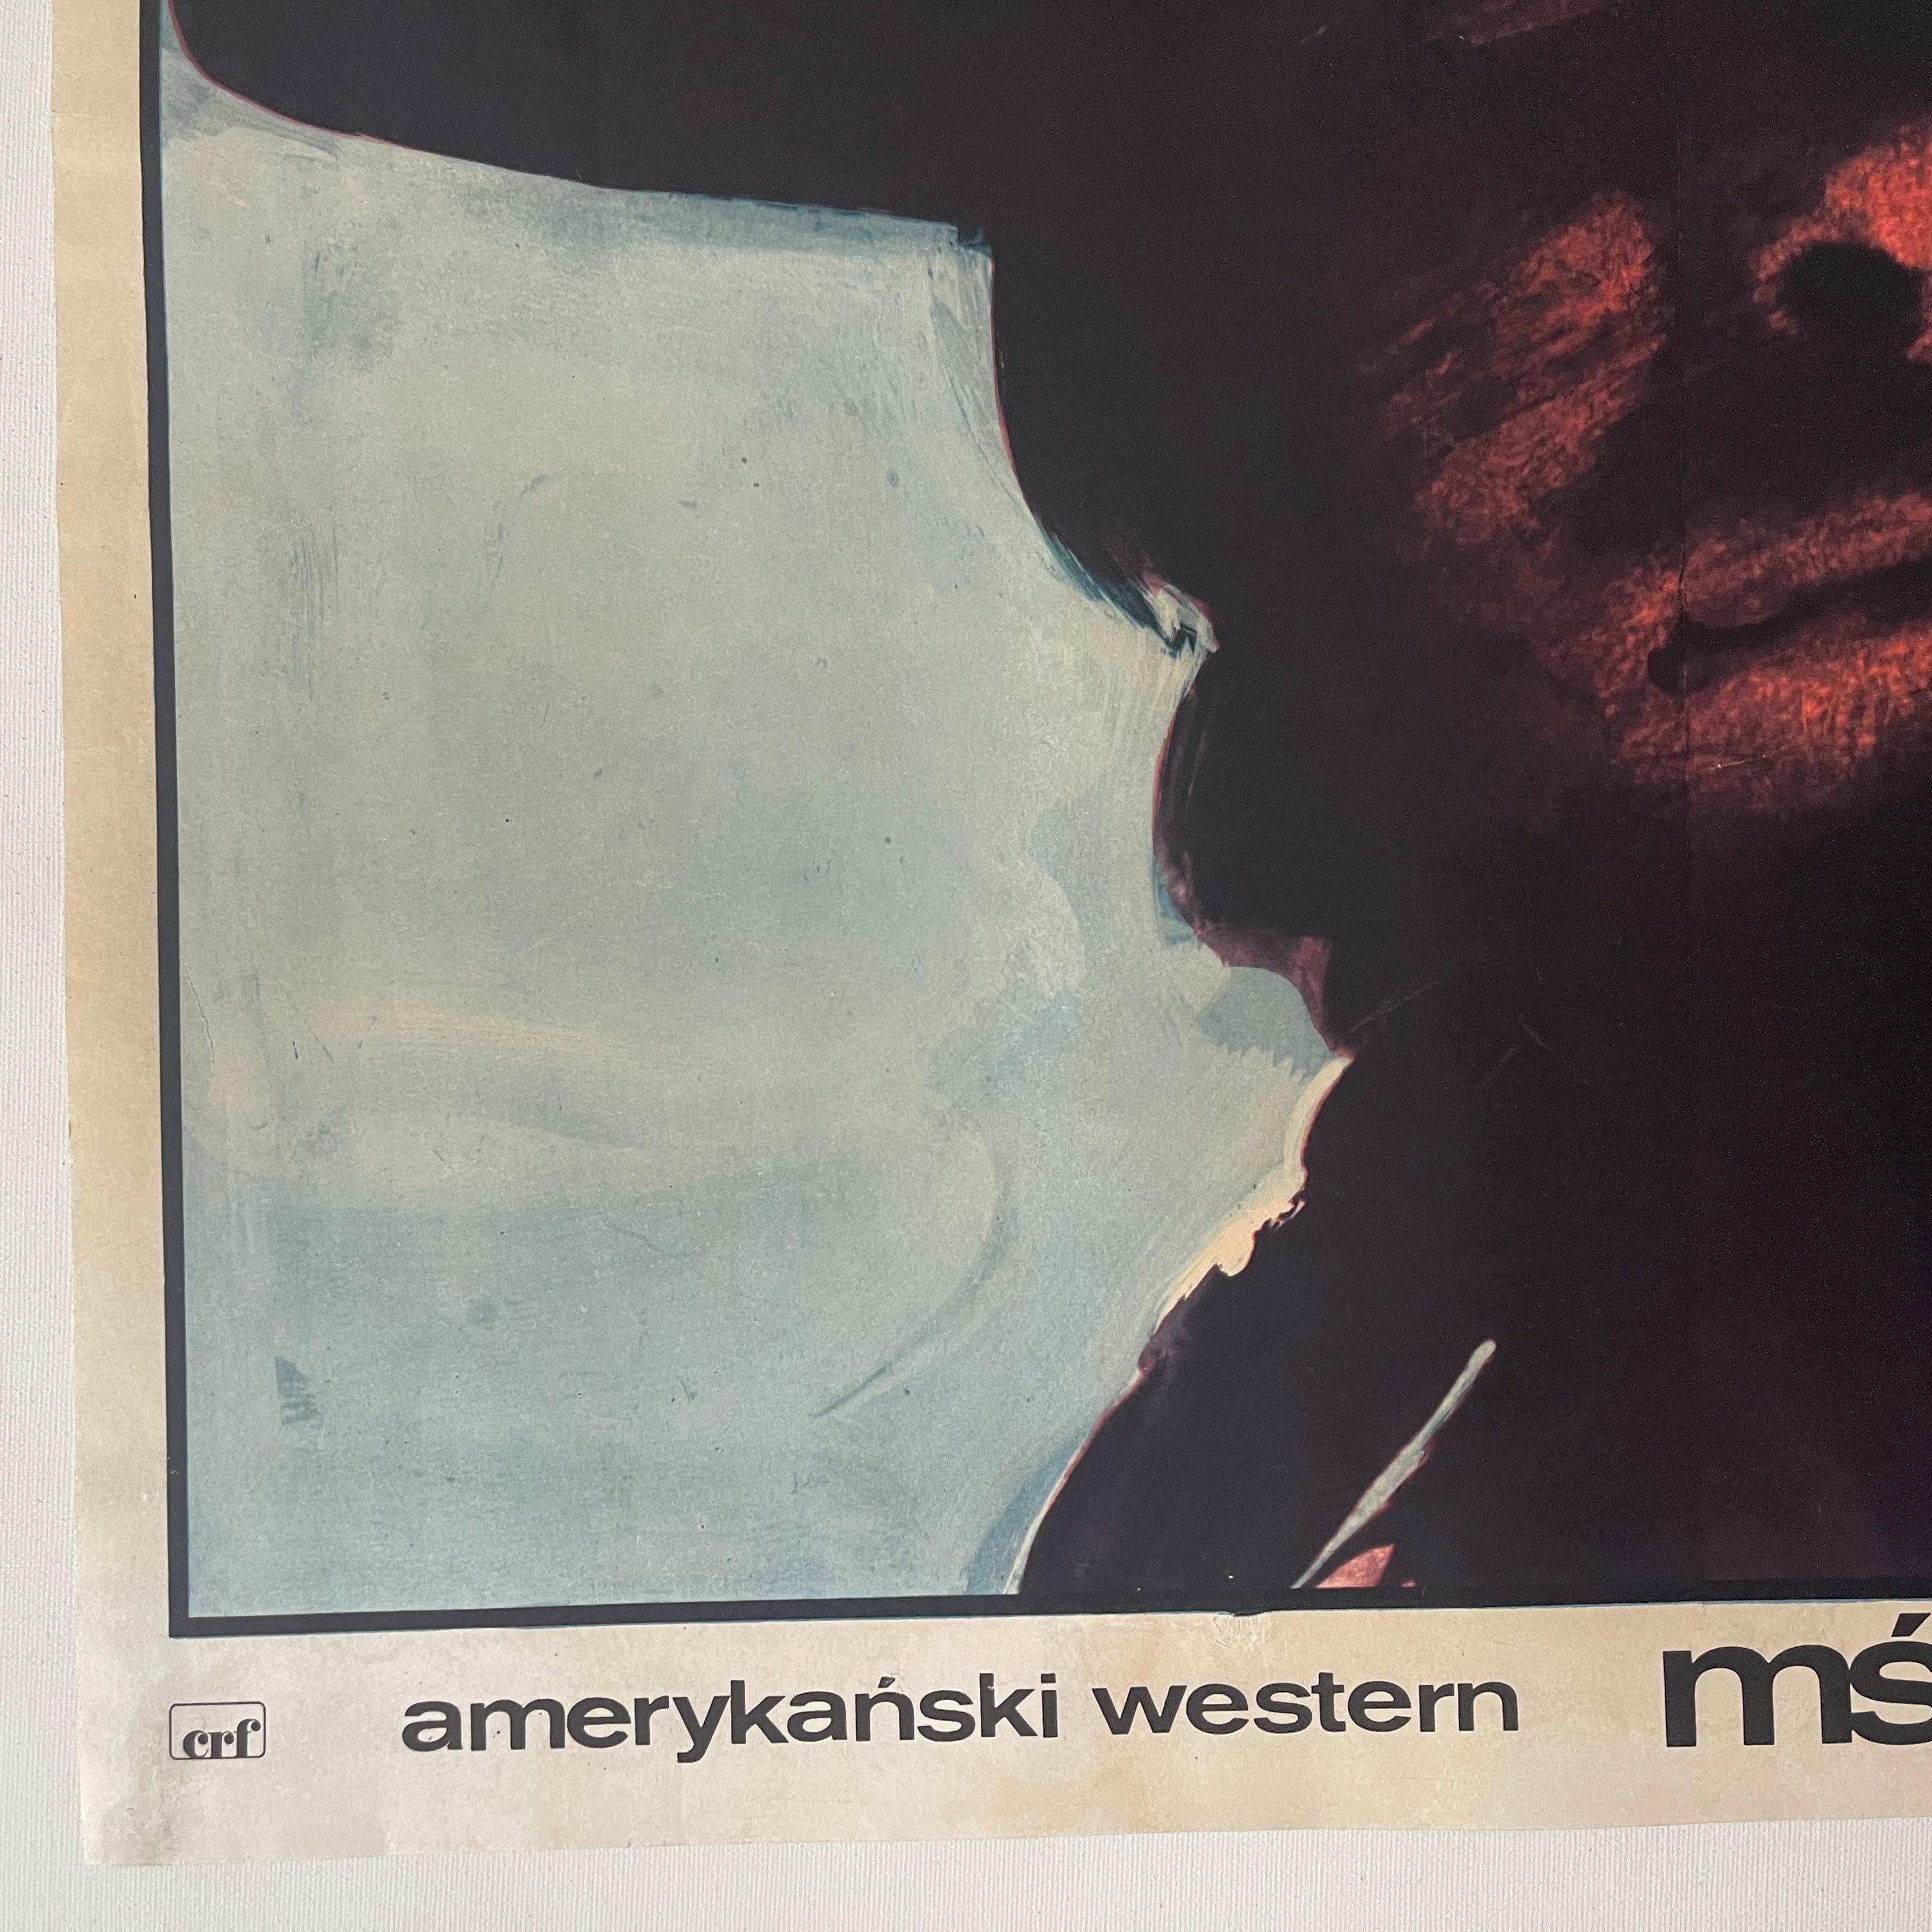 Late 20th Century High Plains Drifter, Vintage Polish Movie Poster by Marek Freudenreich, 1975 For Sale